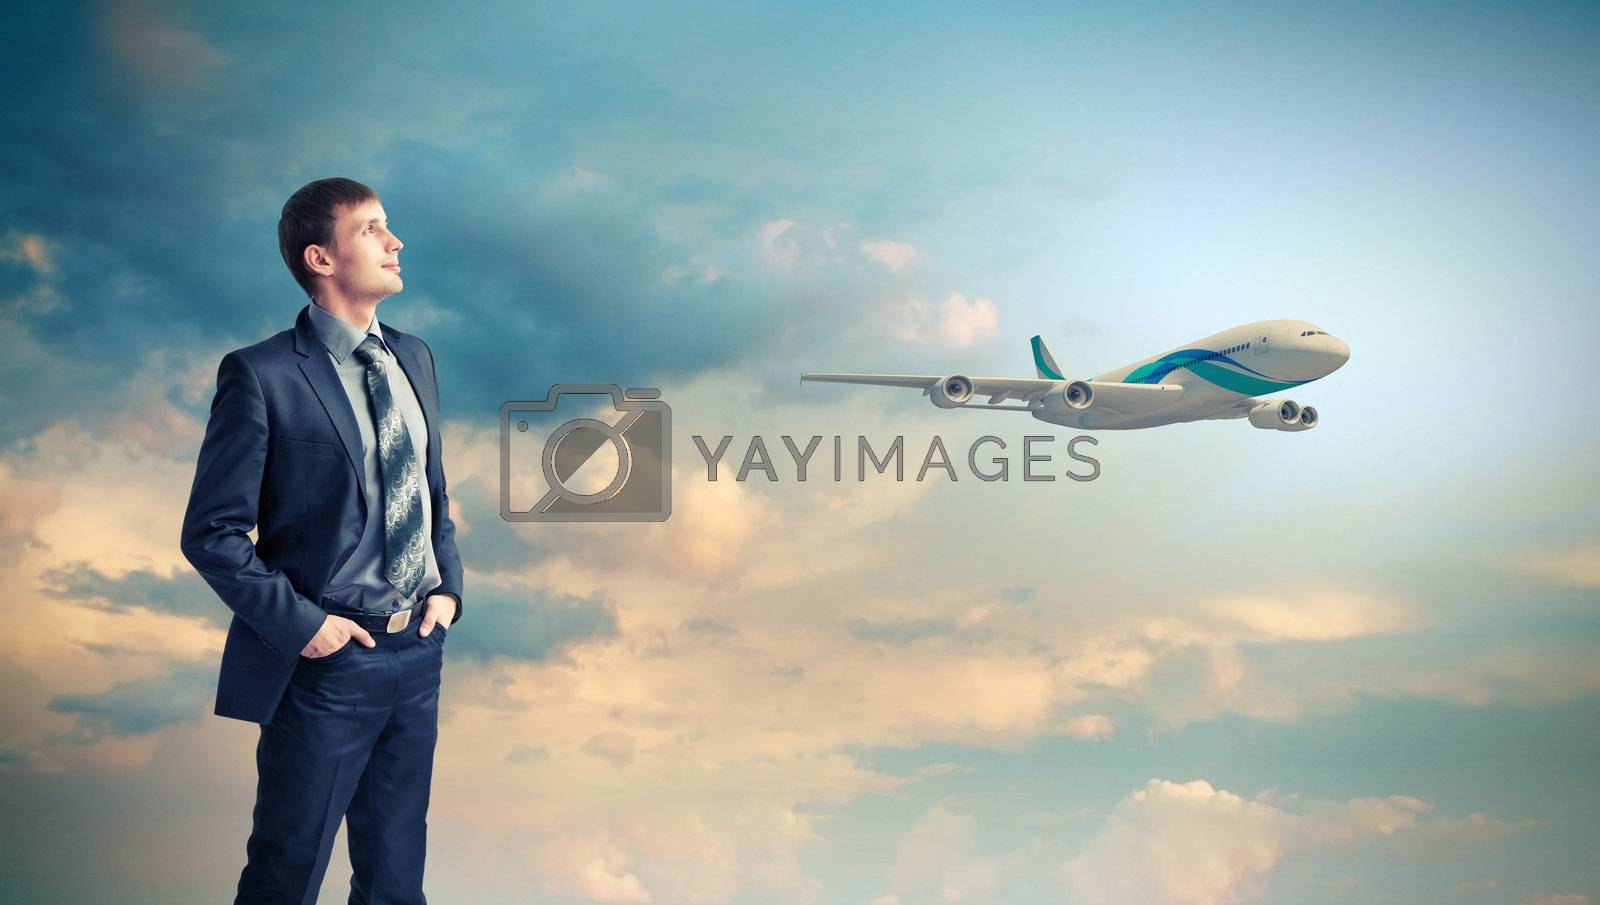 Royalty free image of Business travelling collage with a plane by sergey_nivens